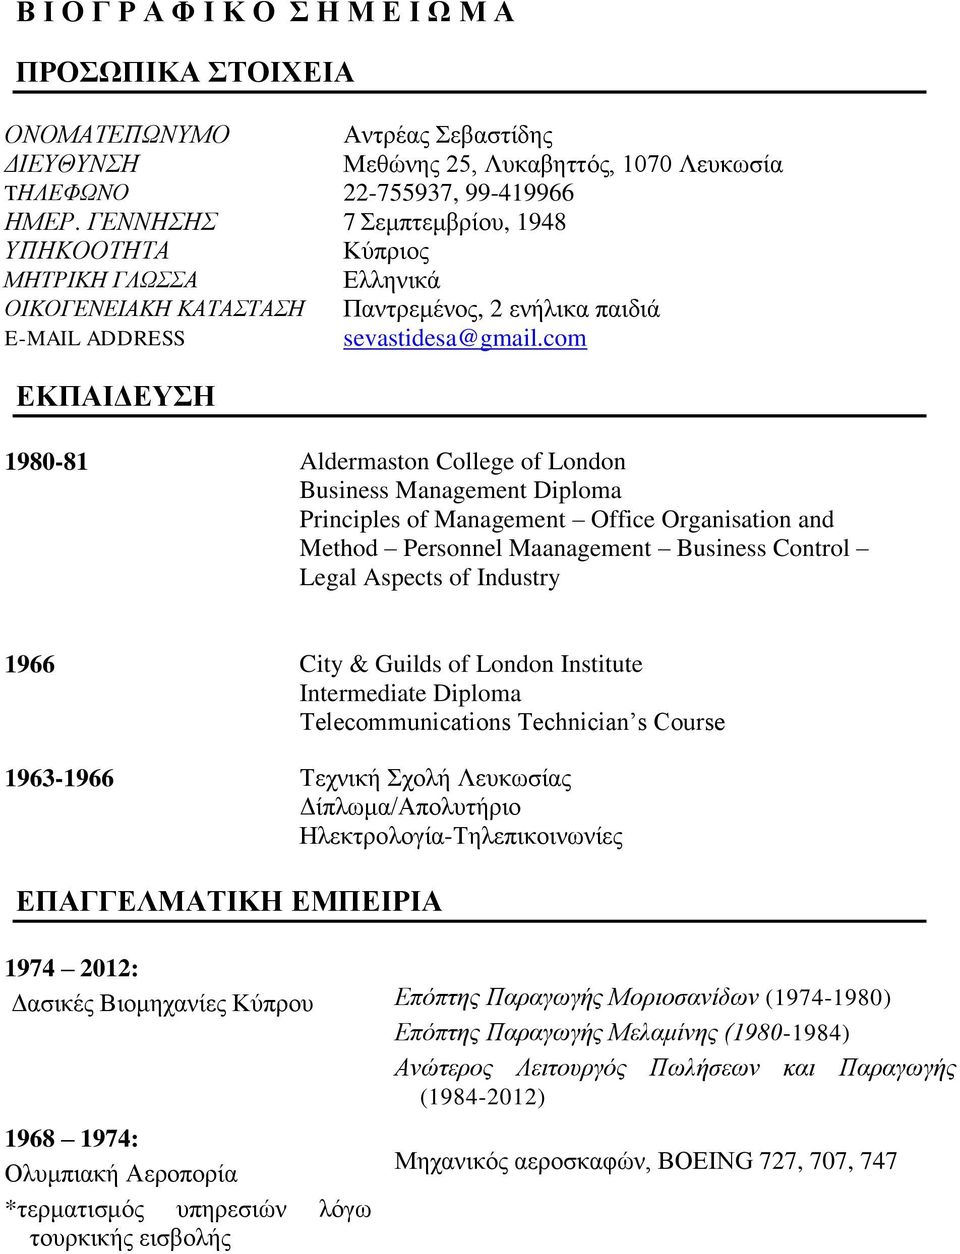 com ΕΚΠΑΙΔΕΥΣΗ 1980-81 Aldermaston College of London Business Management Diploma Principles of Management Office Organisation and Method Personnel Maanagement Business Control Legal Aspects of